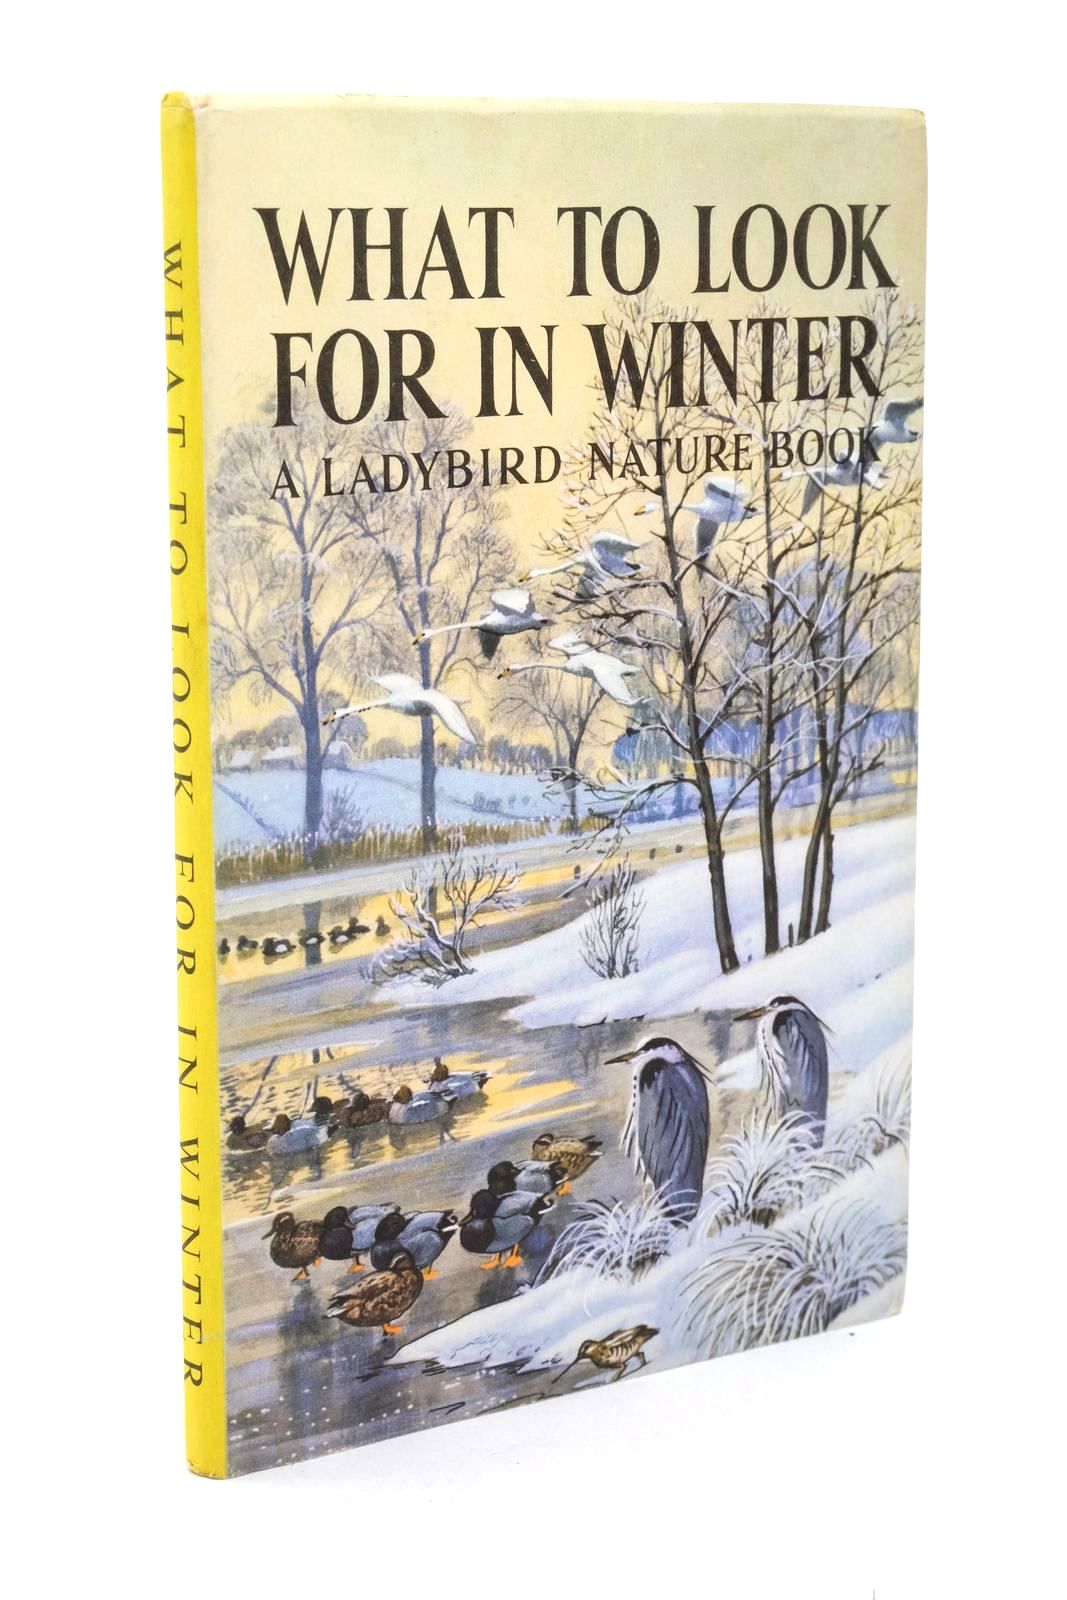 Photo of WHAT TO LOOK FOR IN WINTER written by Watson, E.L. Grant illustrated by Tunnicliffe, C.F. published by Wills &amp; Hepworth Ltd. (STOCK CODE: 1322764)  for sale by Stella & Rose's Books